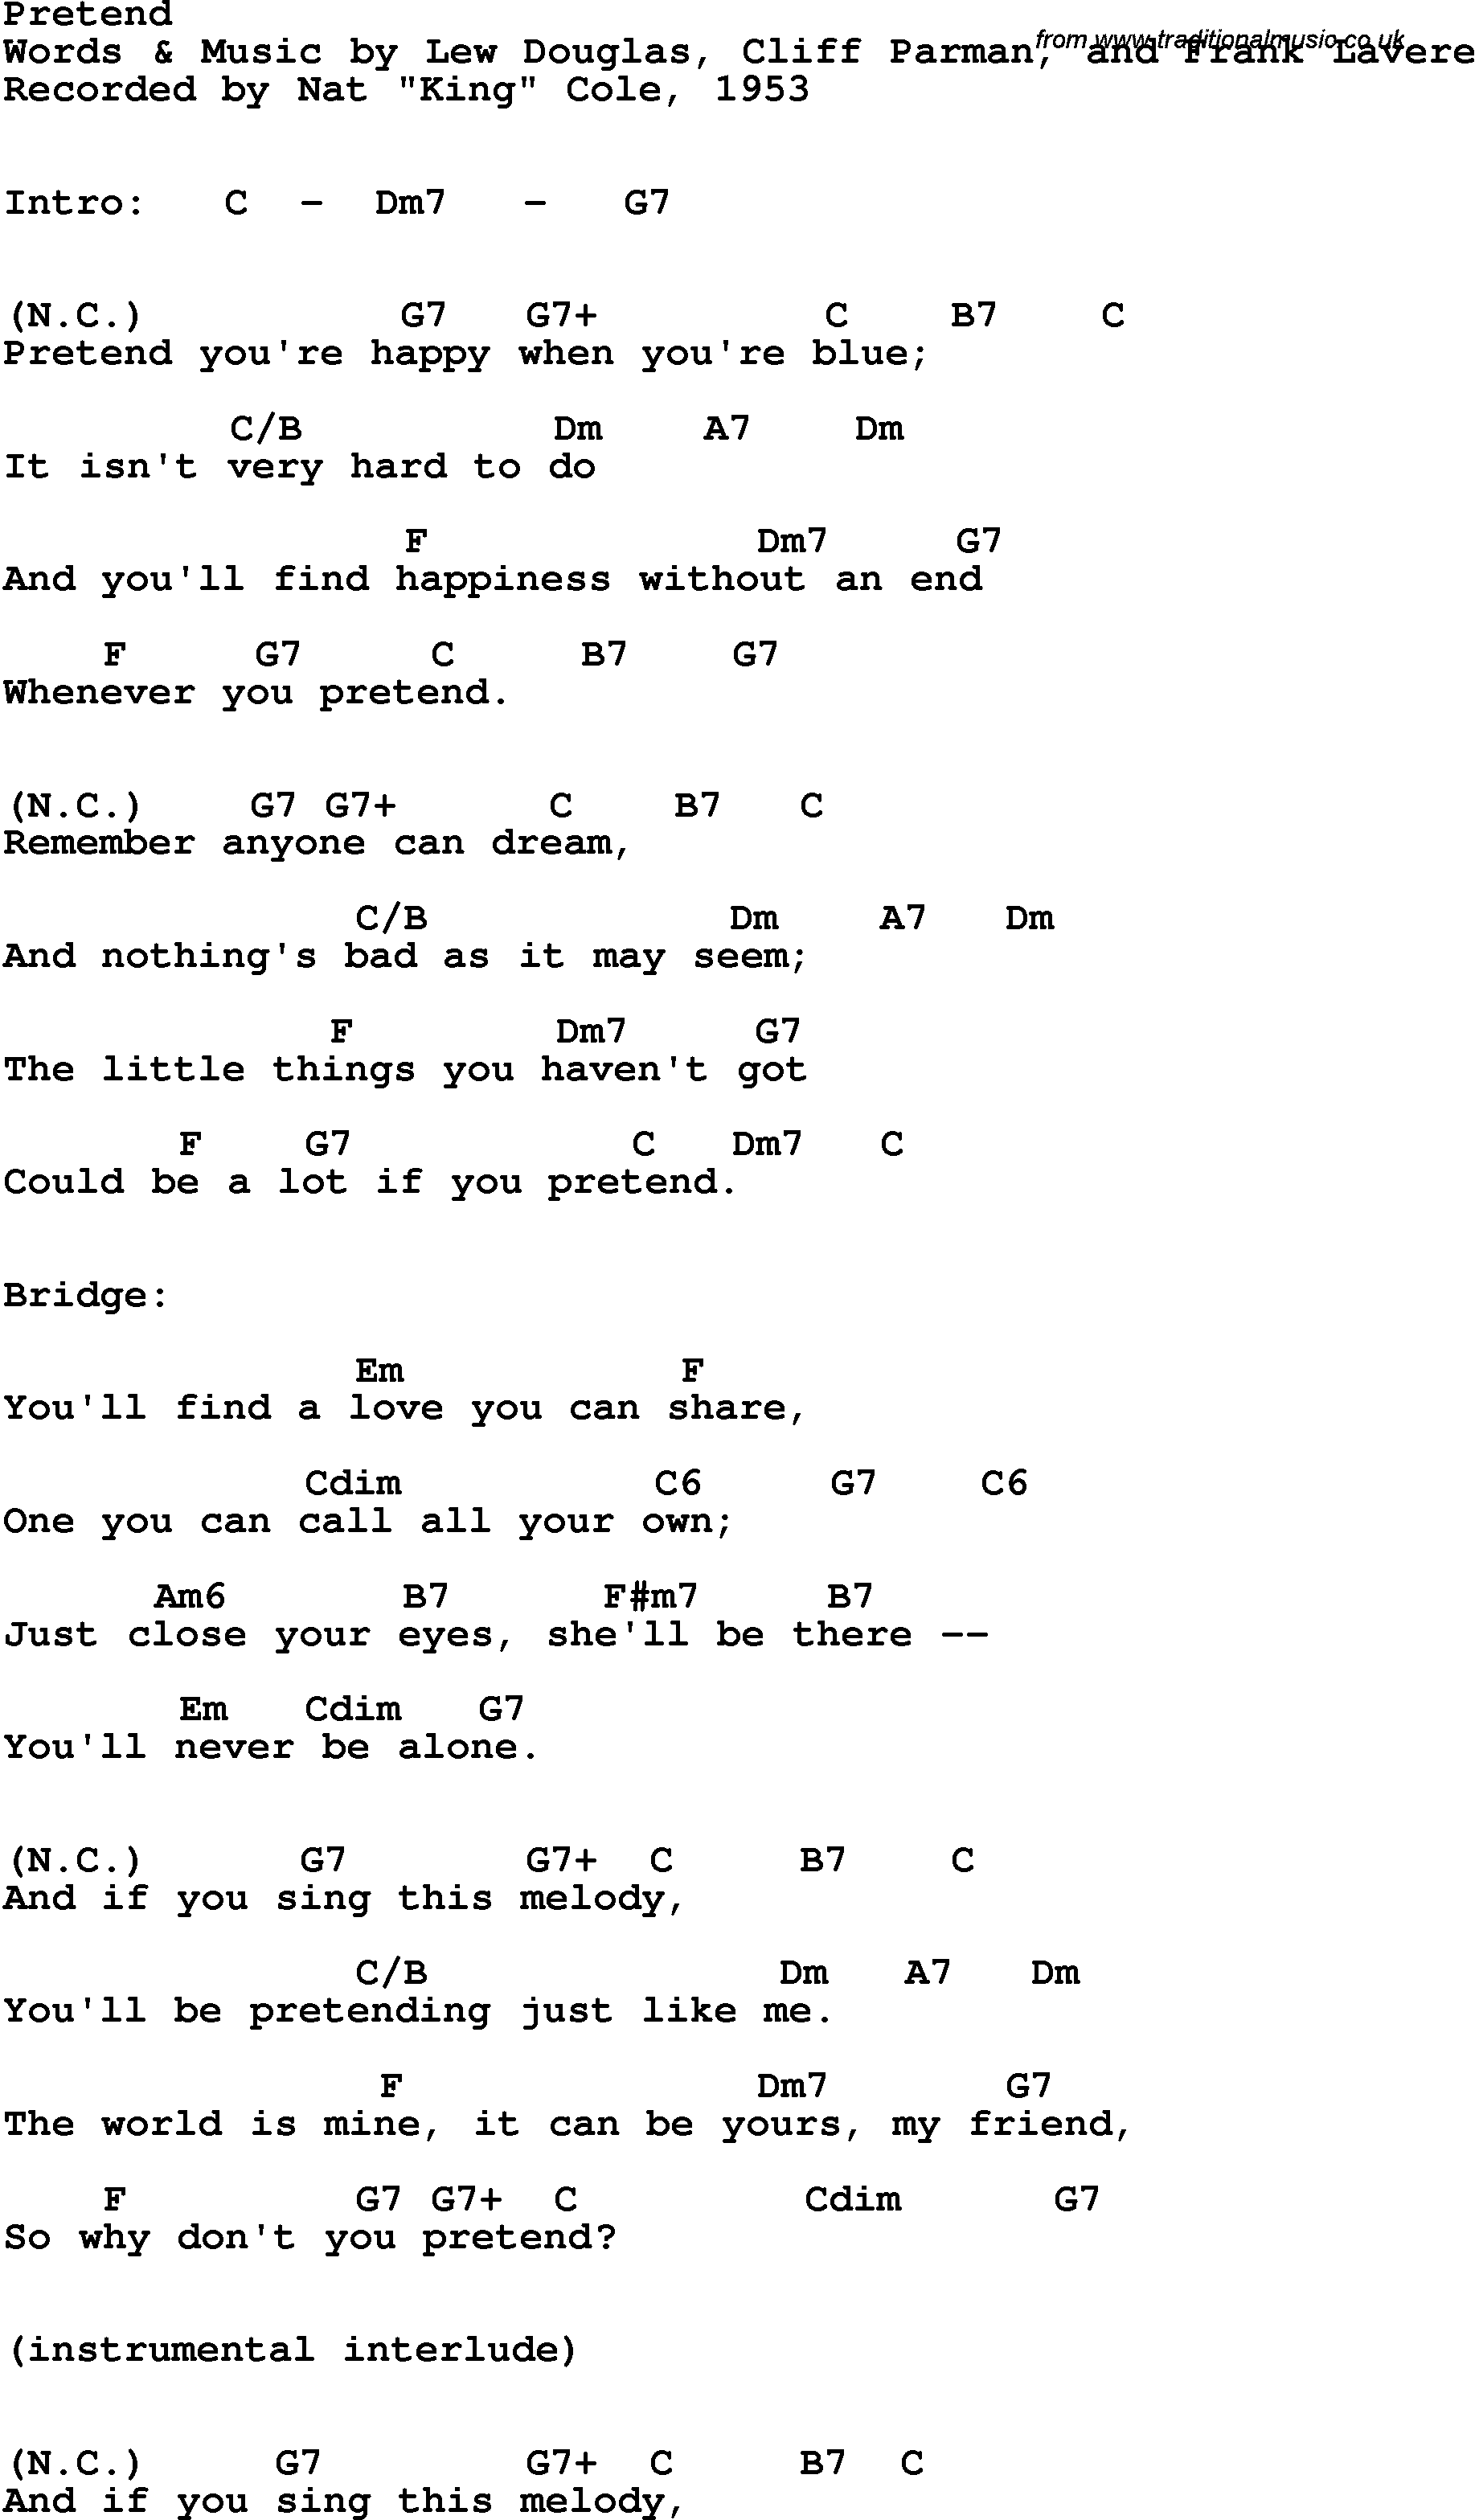 Song Lyrics with guitar chords for Pretend - Nat King Cole, 1953